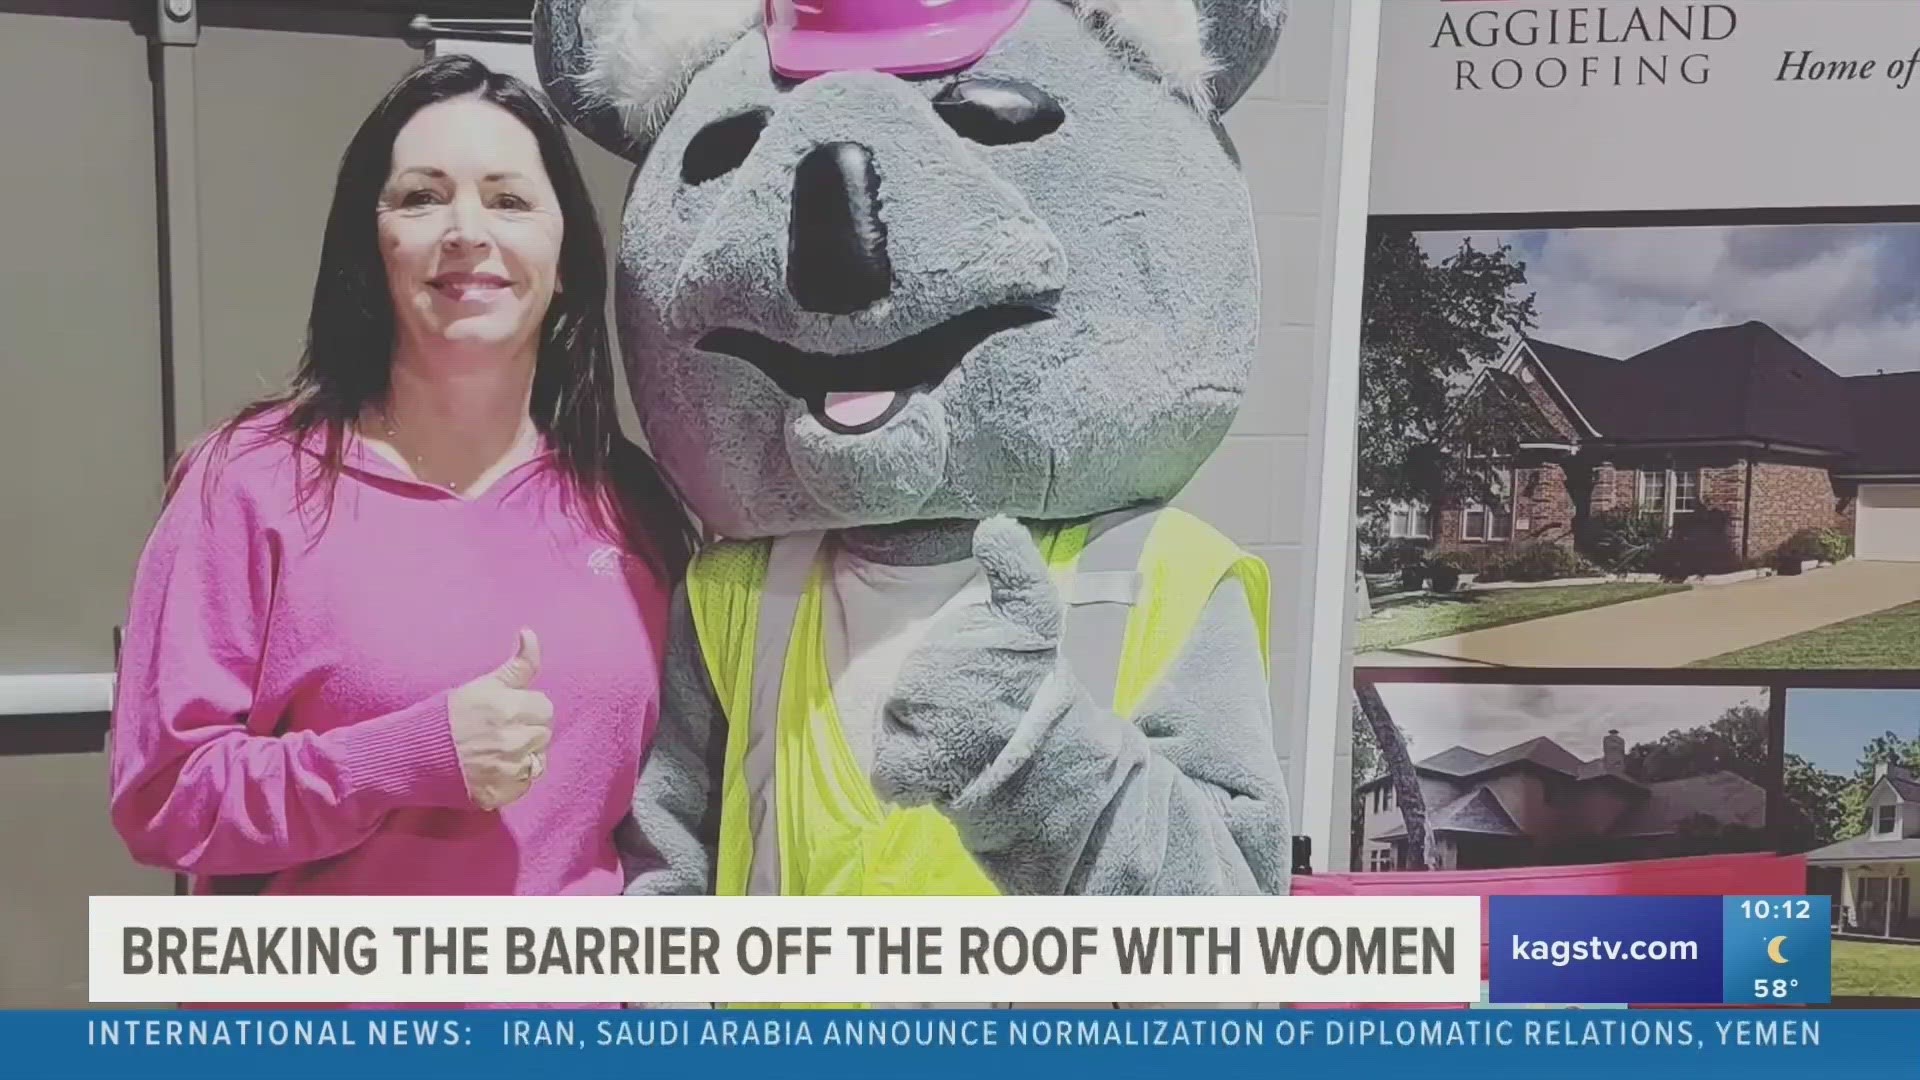 Over 20 years ago, Rayne Knight started a company that would soon become an official Texas A&M Athletics partner. She recaps her journey as a woman in roofing.